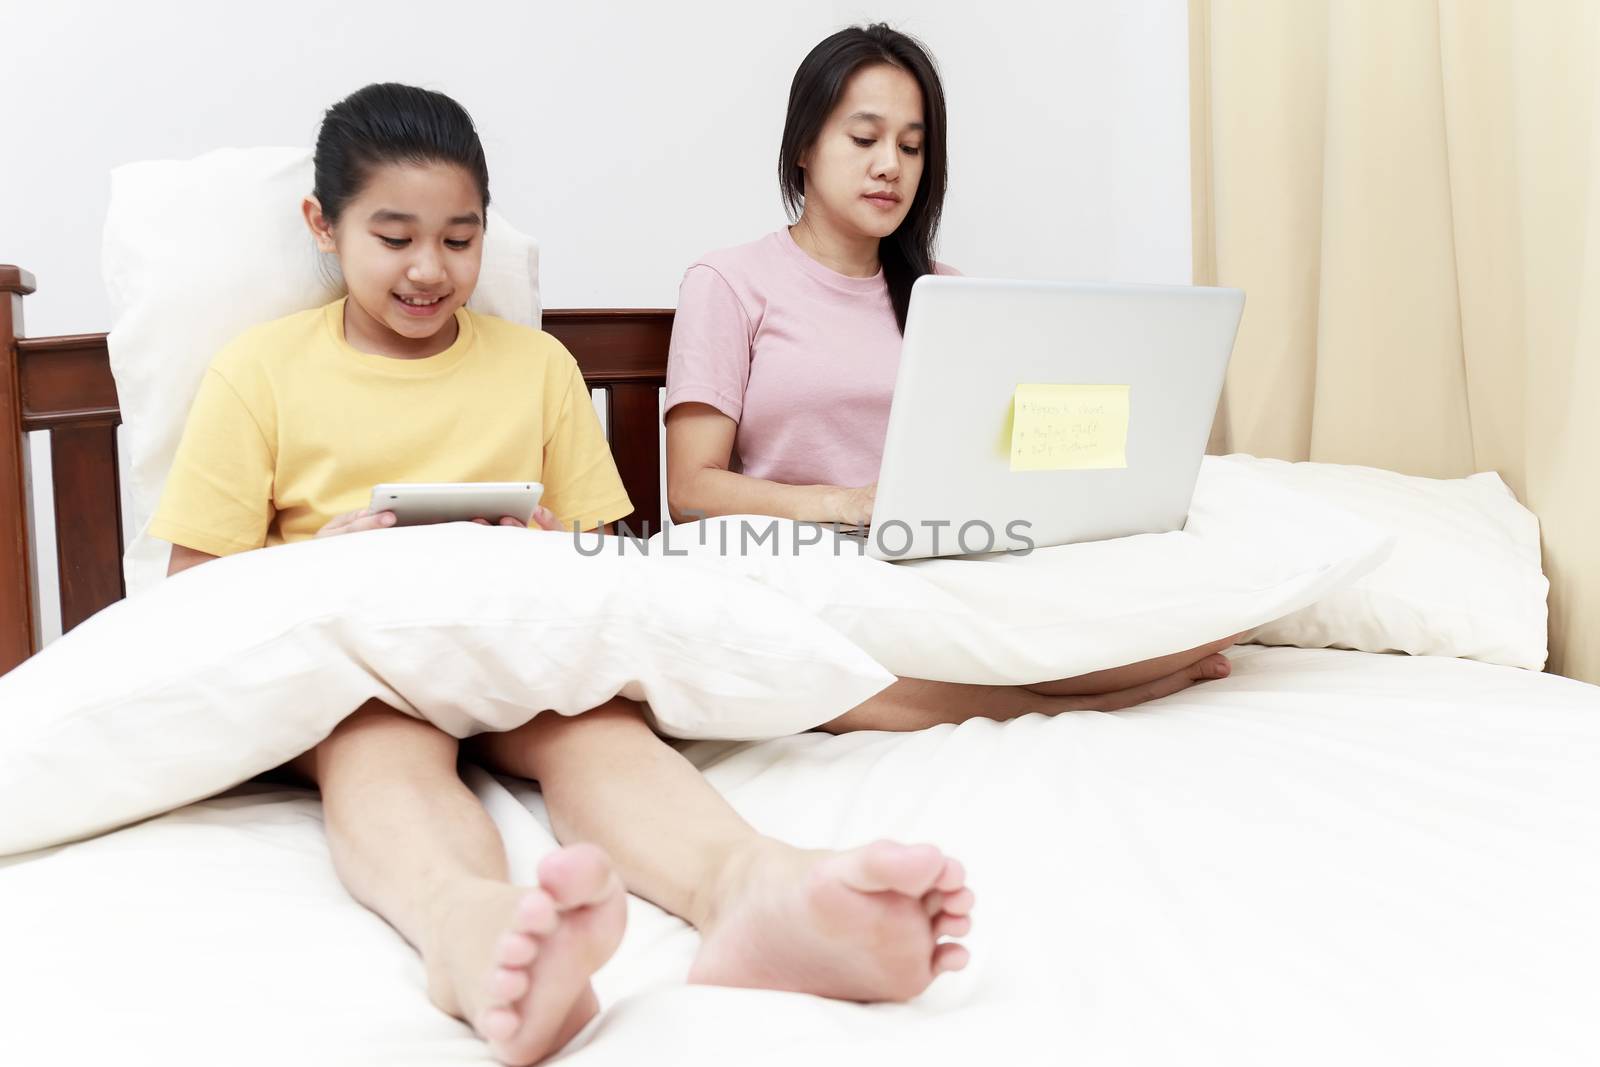 Asian mother and daugther looking laptop and tablet on bed in bedroom. Business women woking with laptop at home with her daugther smiling enjoy with tablet on bed. Work at home concept.